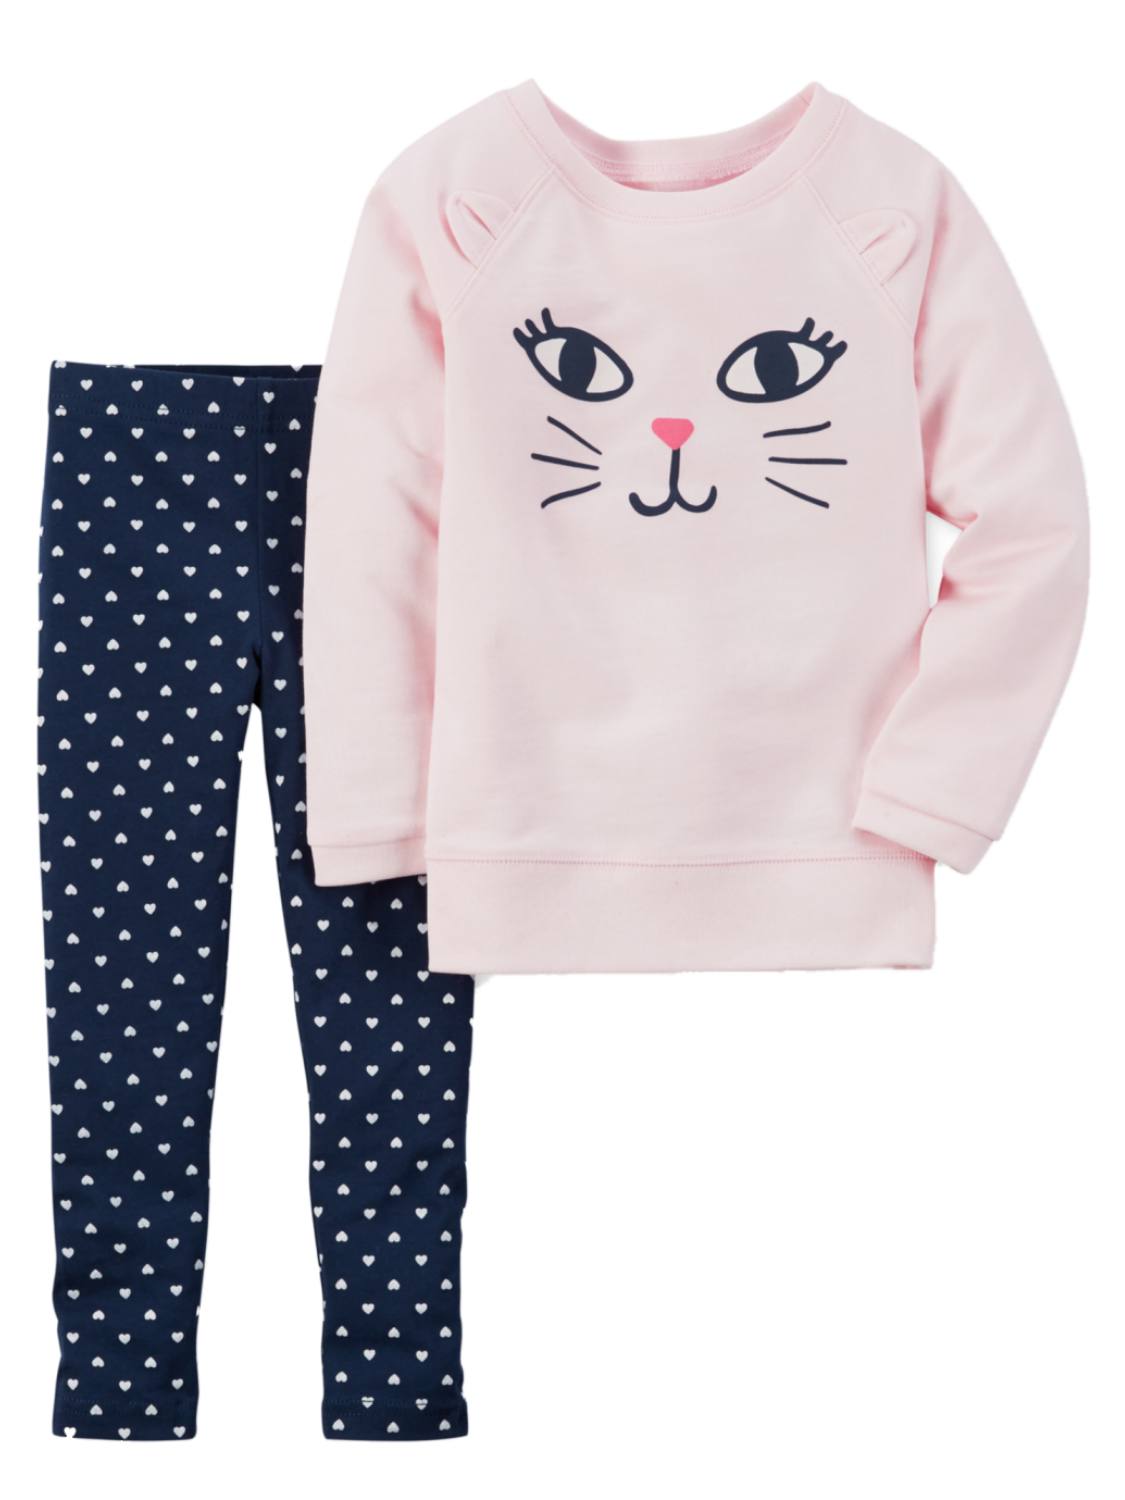 Carter's Carters Infant Girls Baby Outfit Pink Kitty Cat Sweatshirt & Heart Leggings 3m